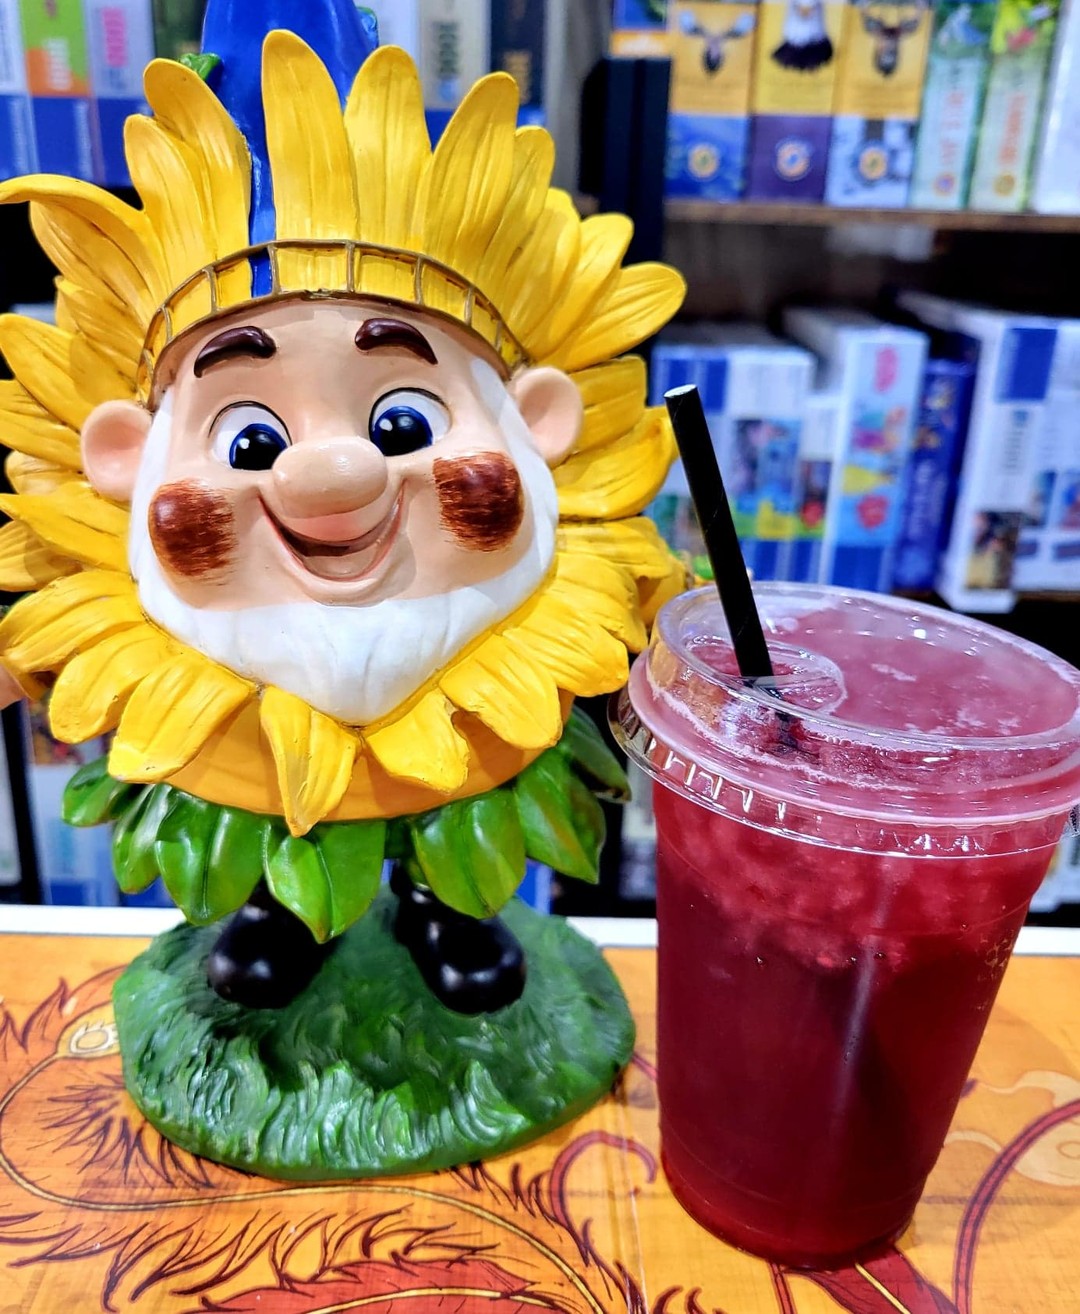 Holy guacamole! Spring is finally here, after winter stuck around like a clingy girlfriend for too long. Get in the spring mood with one of The Gnoshery's iced teas! The one featured below is a Honey Red Hibiscus with Huckleberry Flavor!

#gnoshery #gnomegames #icedtea #gnomes #sunshine🌞